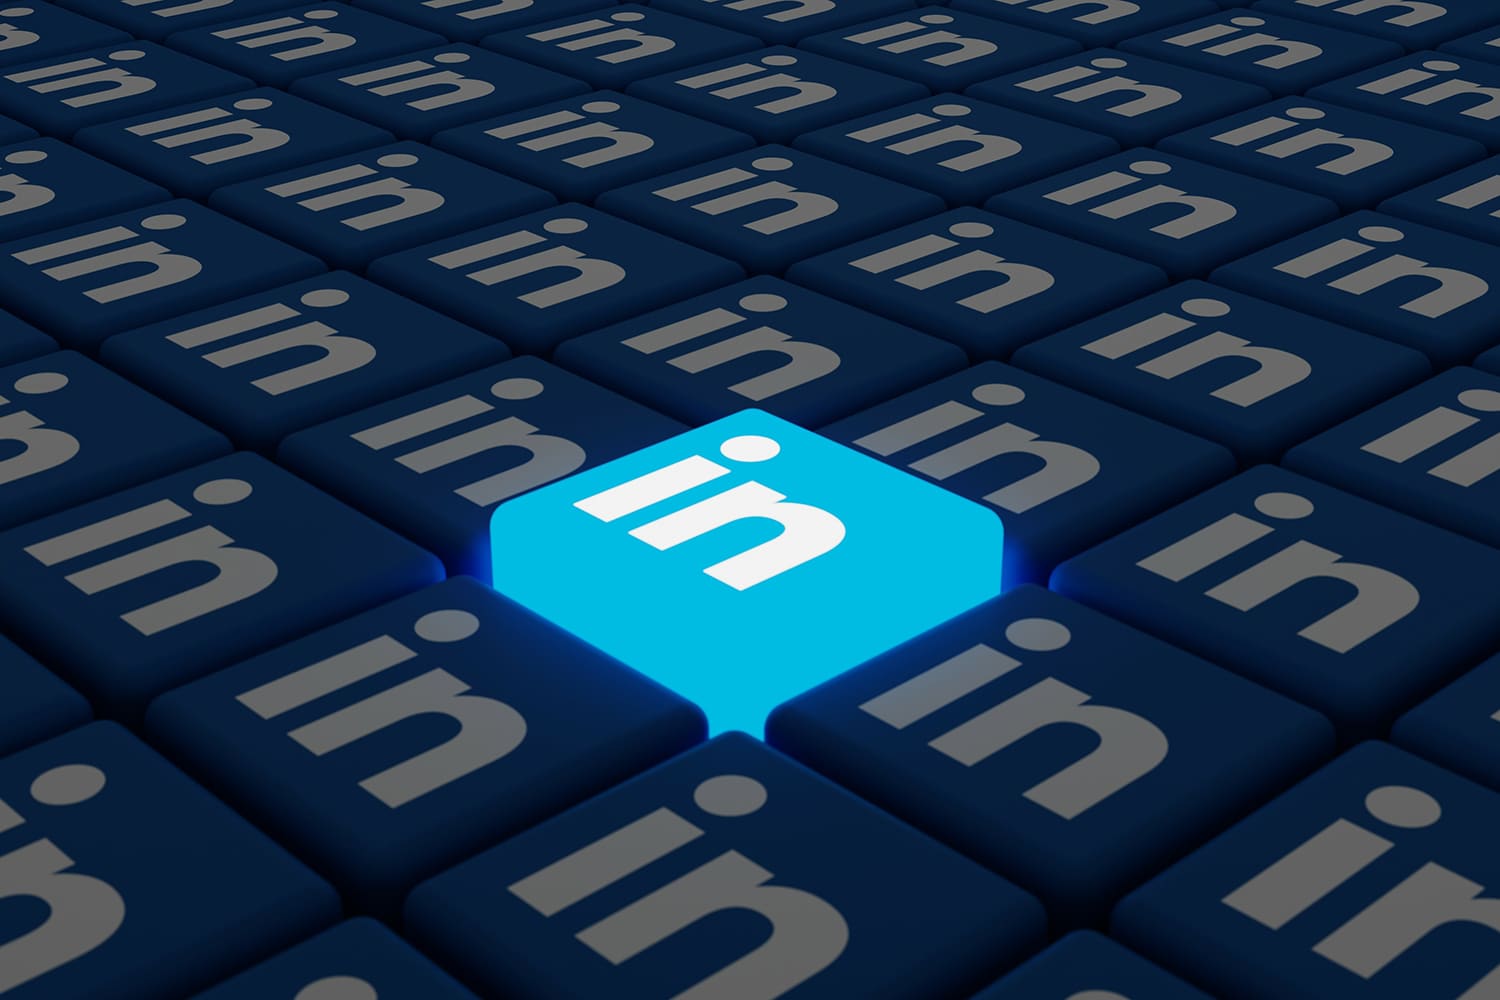 field of keyboard keys with the LinkedIn logo with one key protruding and lit up